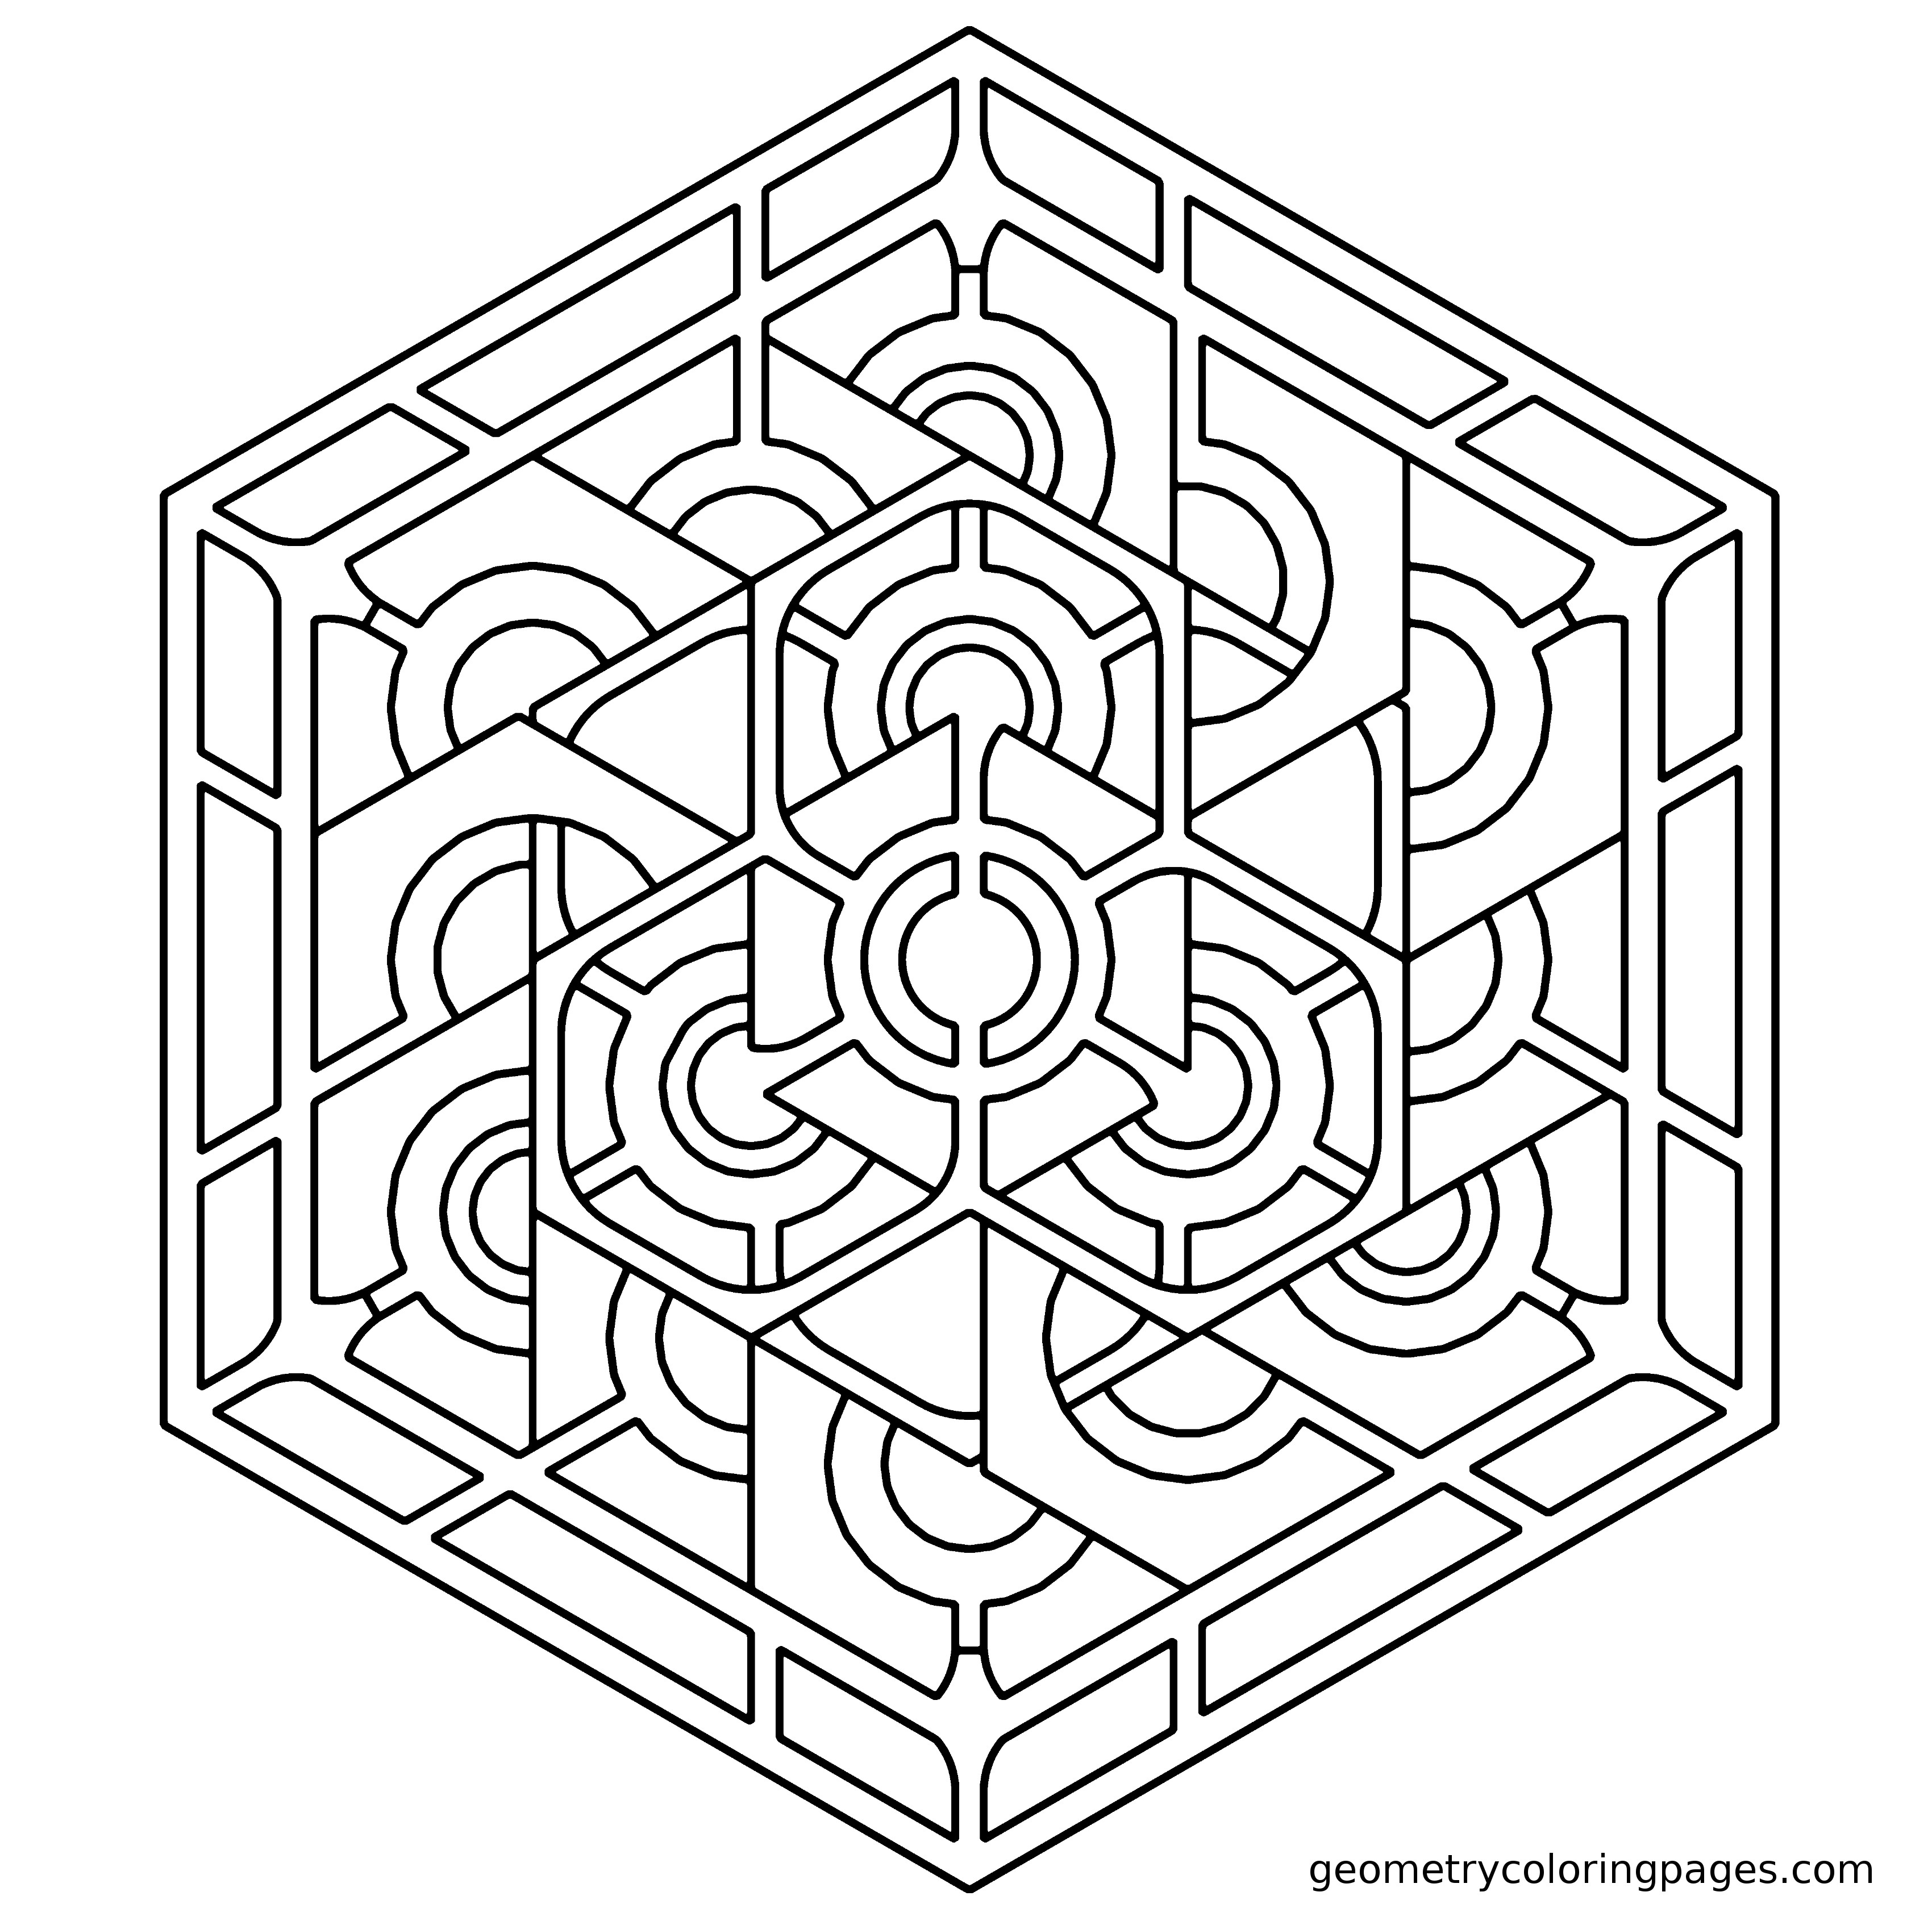 Geometric Coloring Pages For Kids
 Geometric Coloring Pages Bestofcoloring